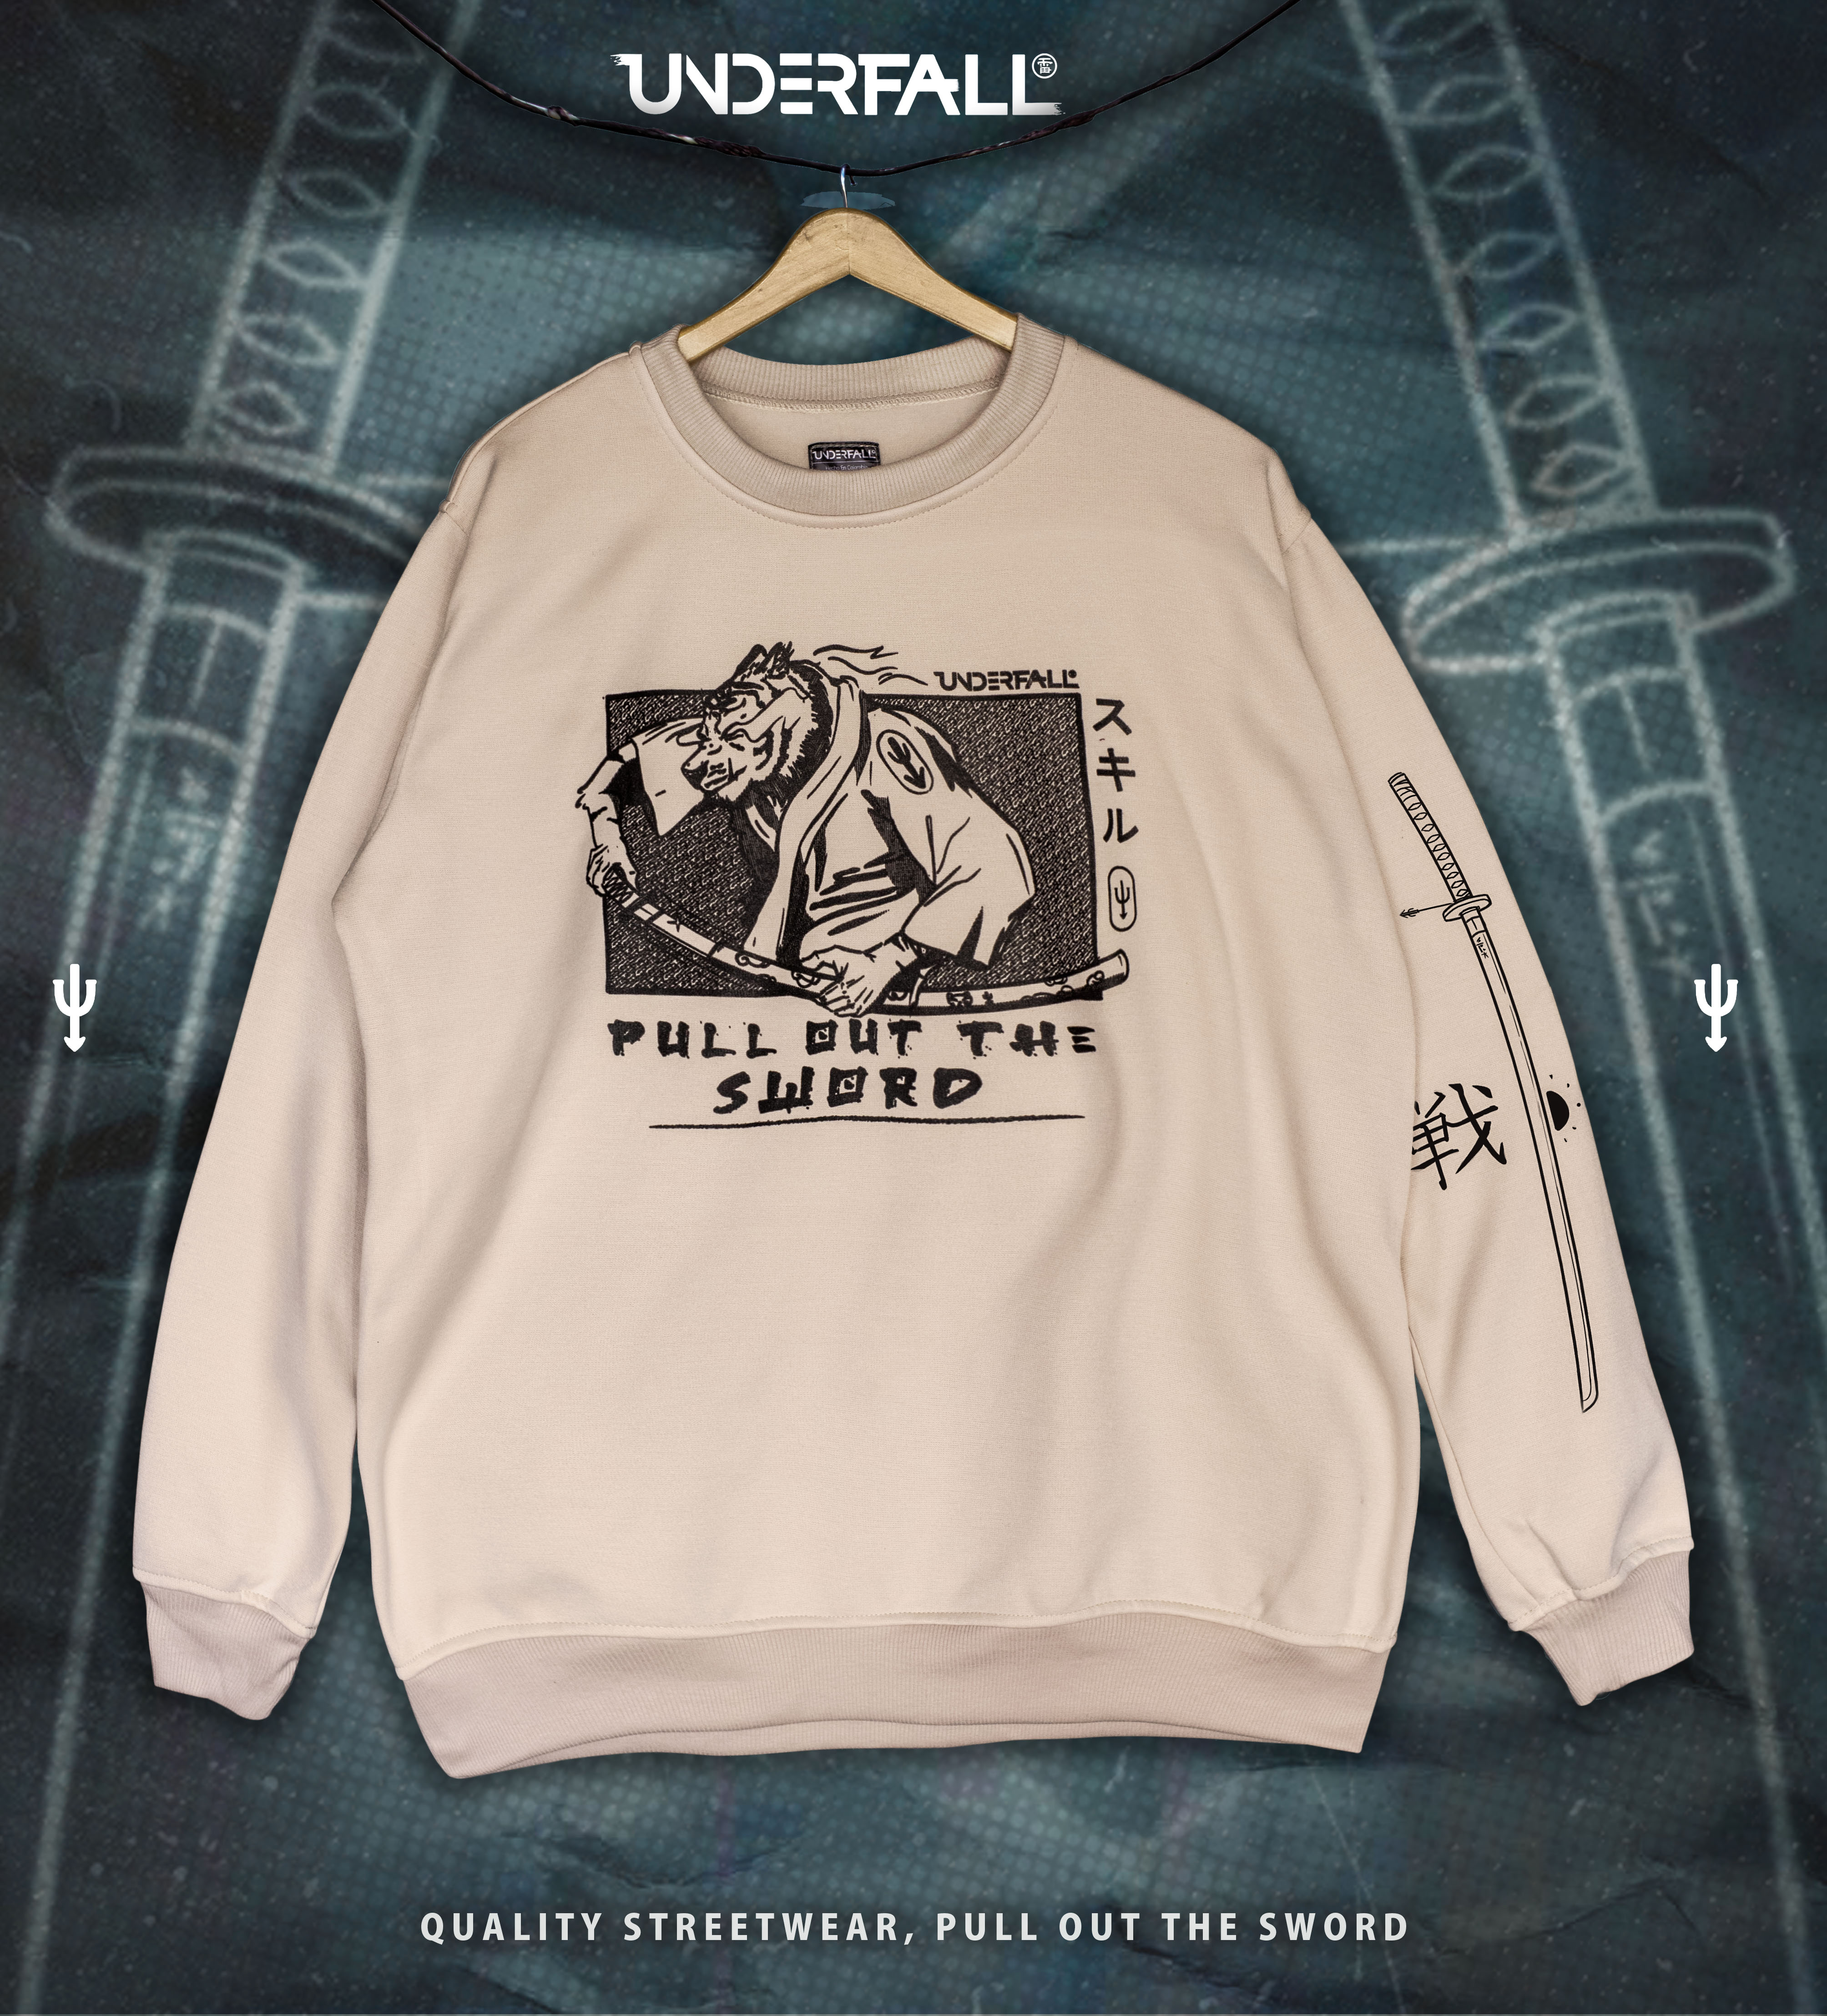 CrewNeck / Pull out the sword